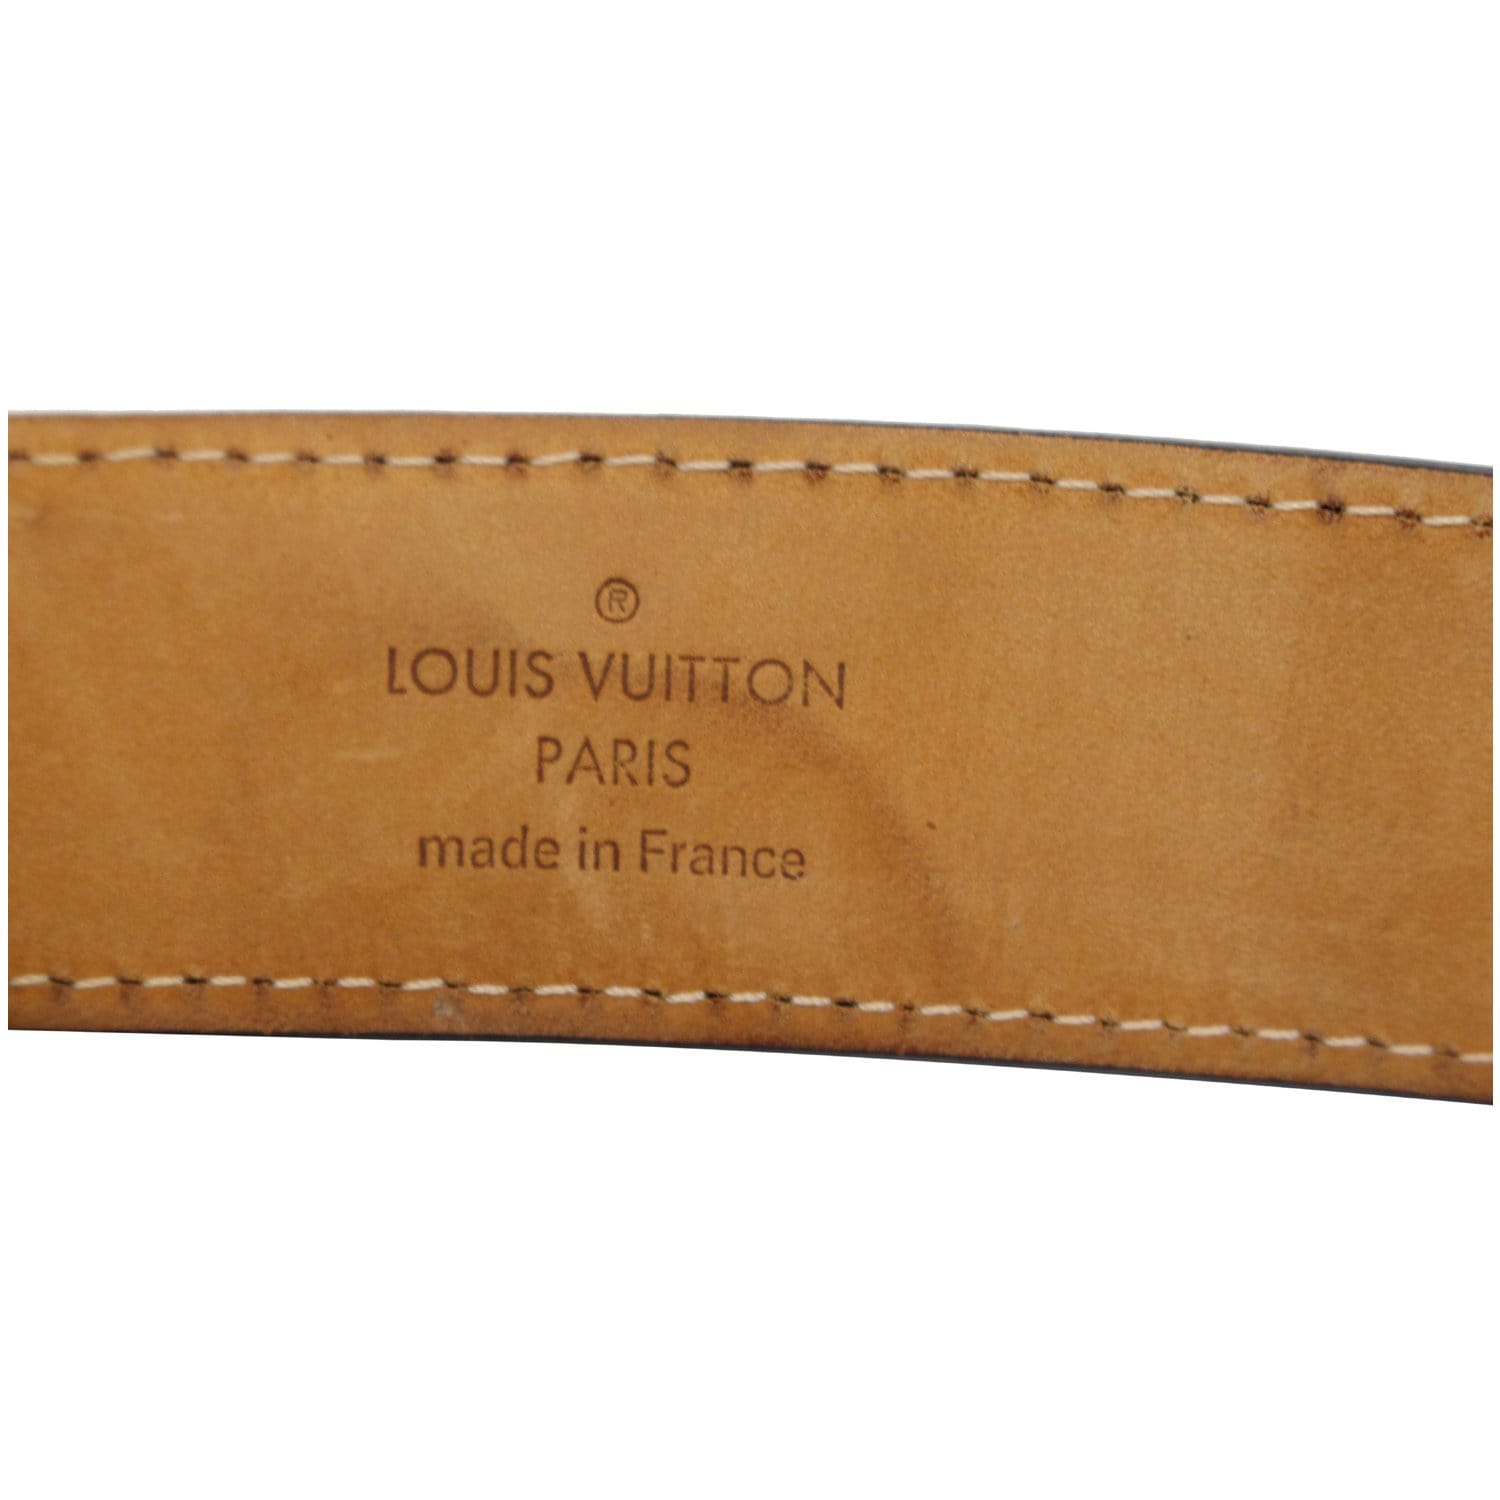 louis vuitton belt made in france real